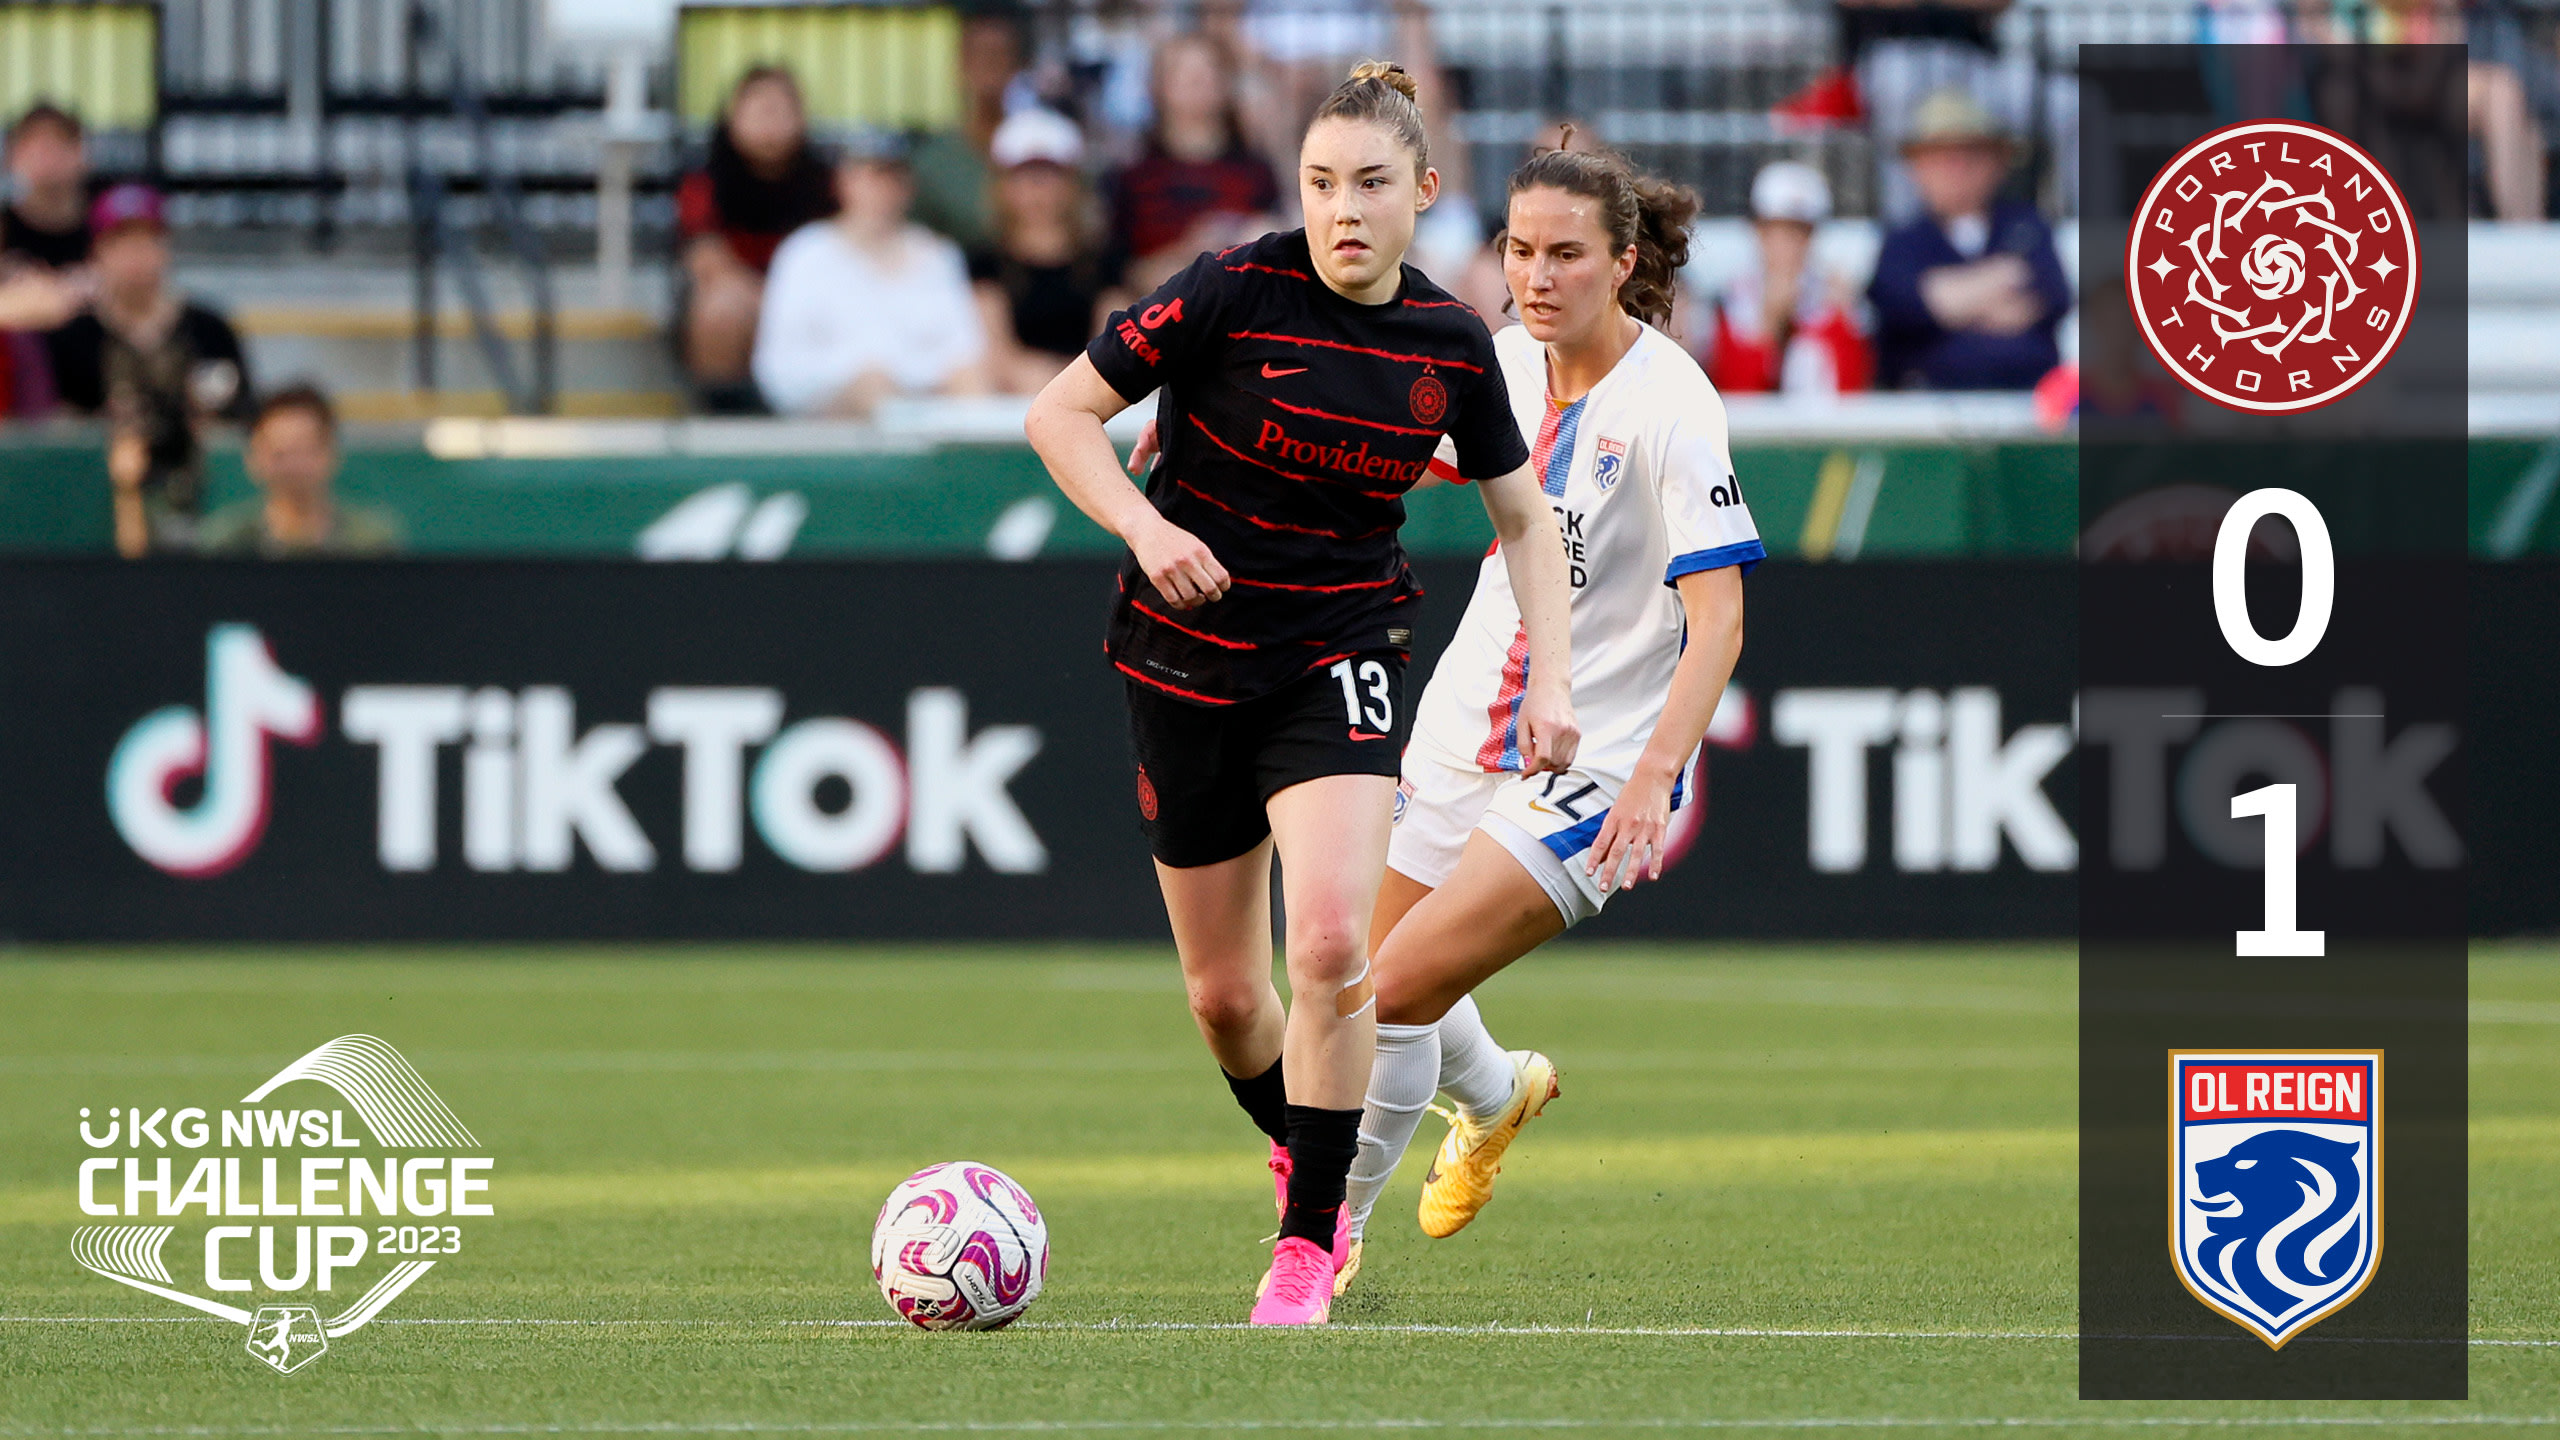 Thorns suffer 1-0 defeat to OL Reign in 2023 UKG Challenge Cup